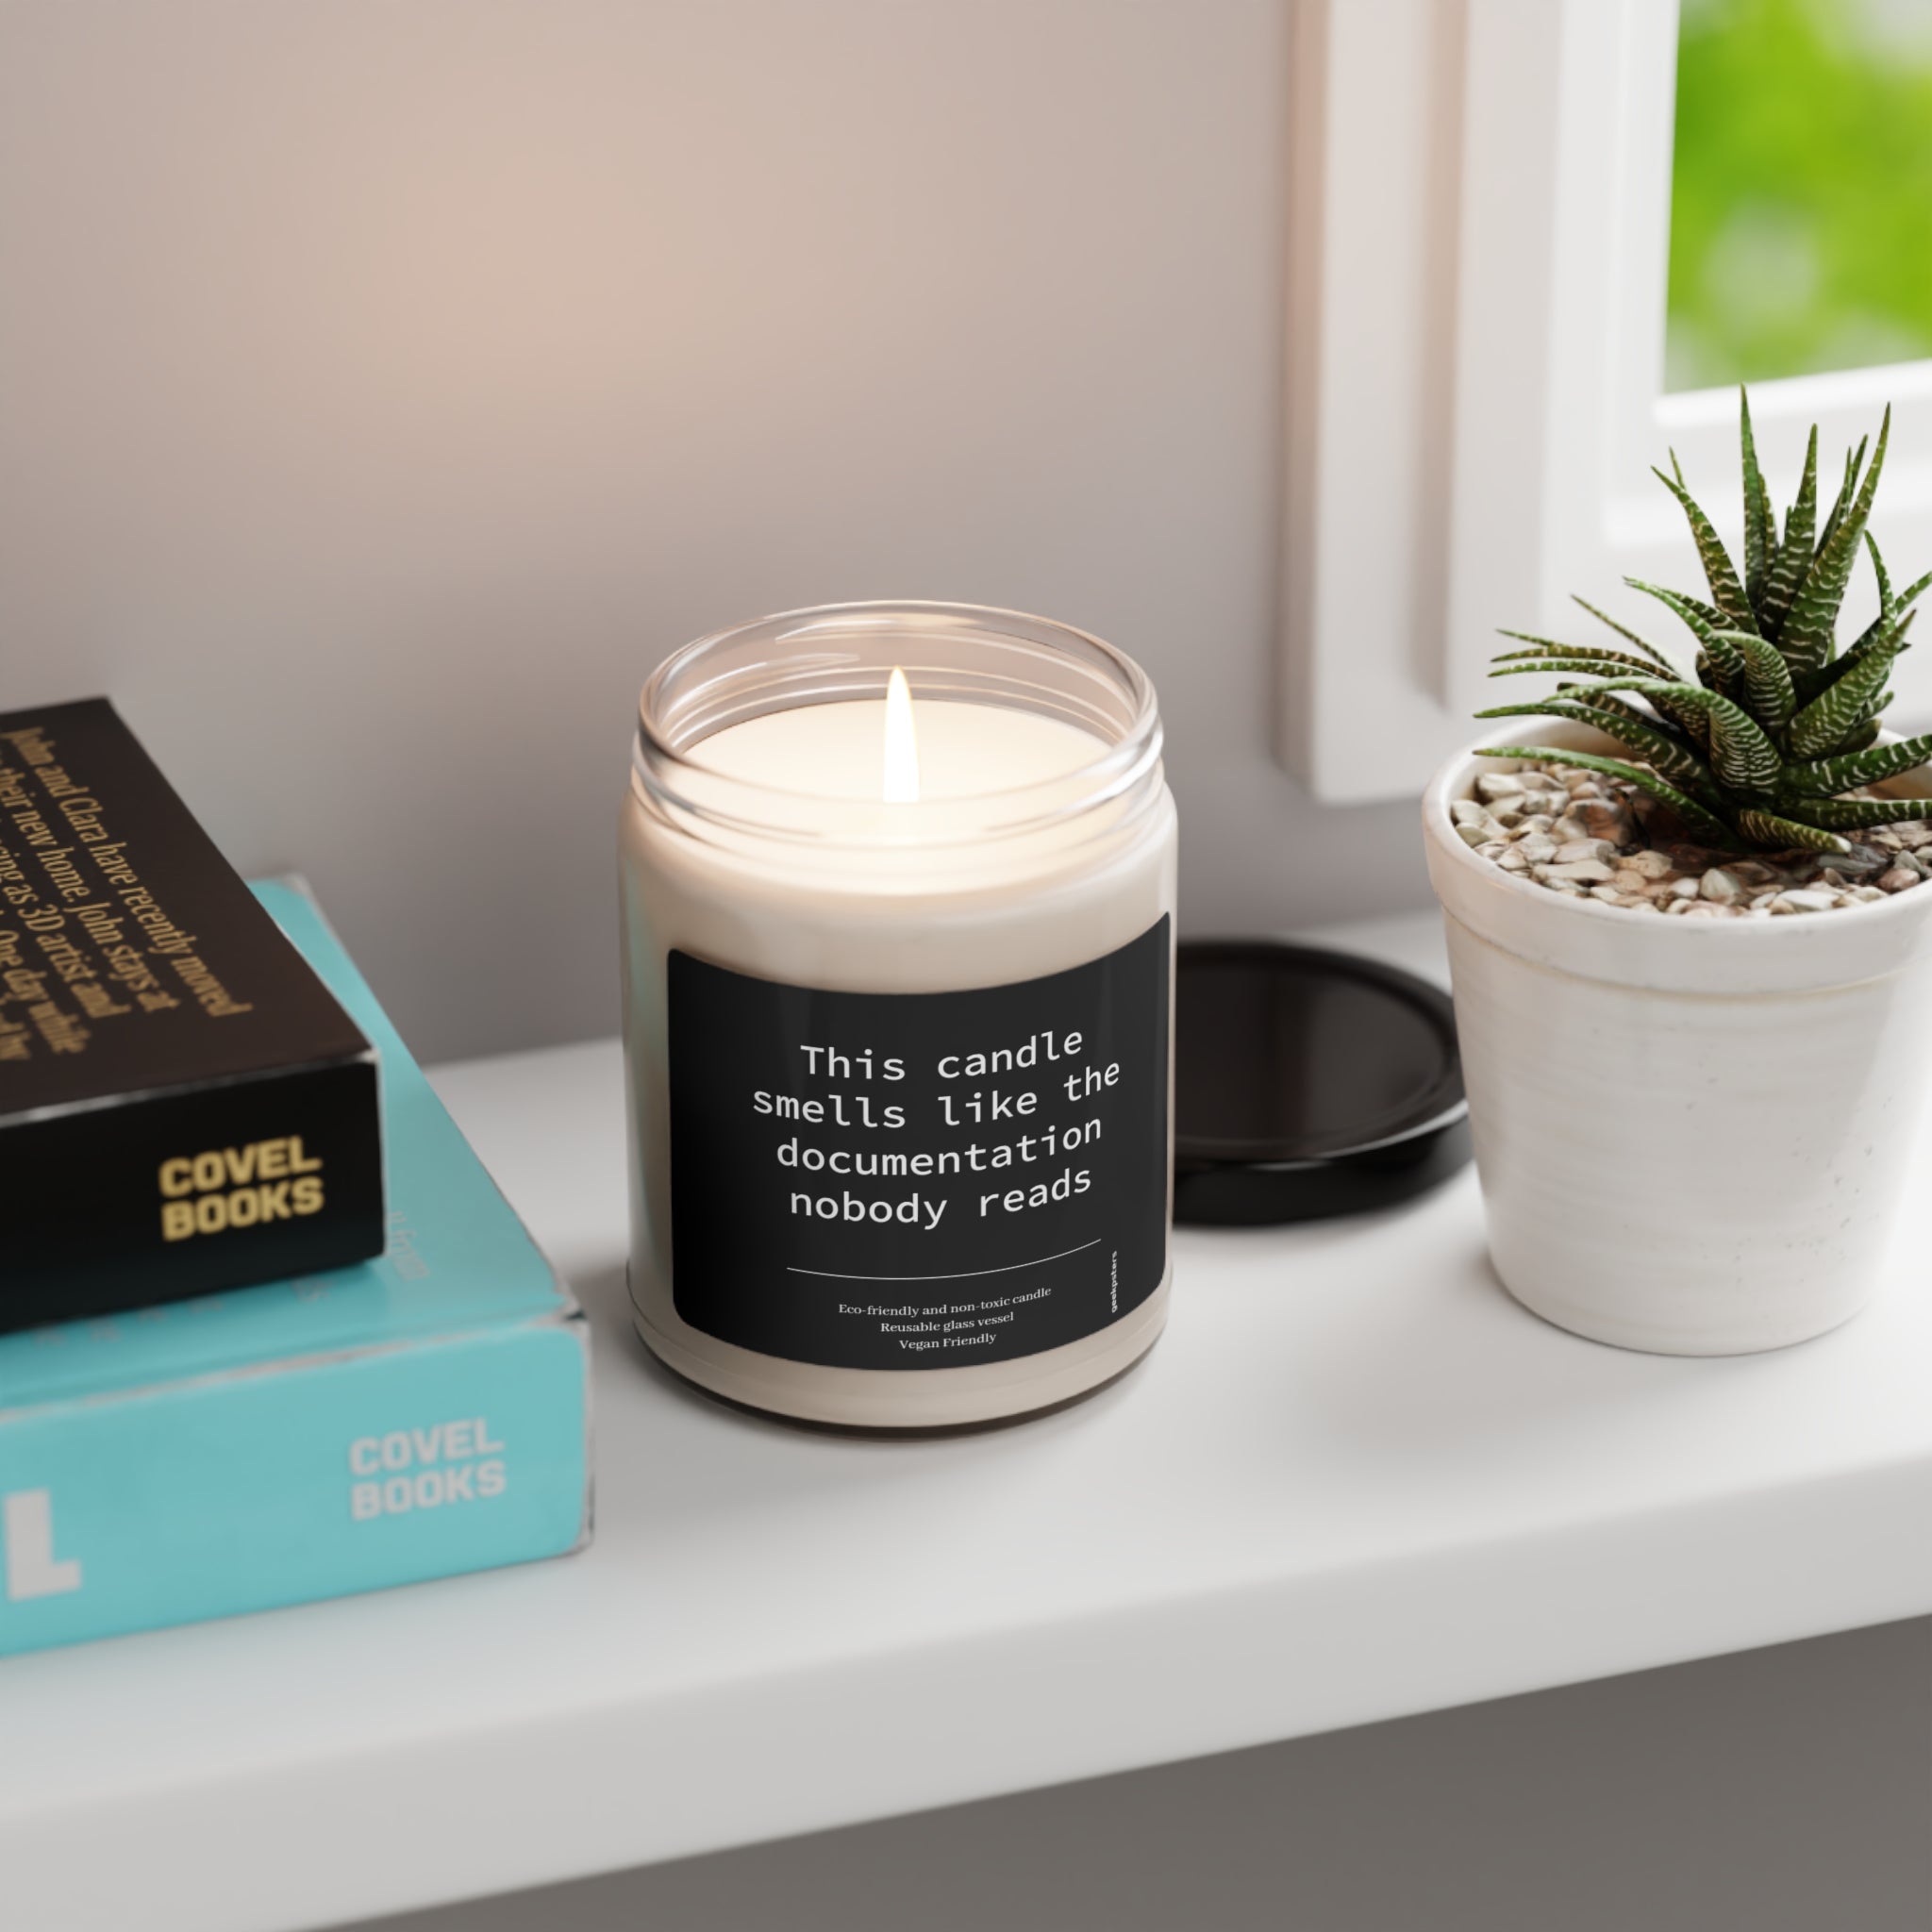 A lit scented "This Candle Smells Like the Documentation Nobody Reads" candle with a natural soy wax blend on a windowsill with a humorous label, next to a potted plant and stack of books.